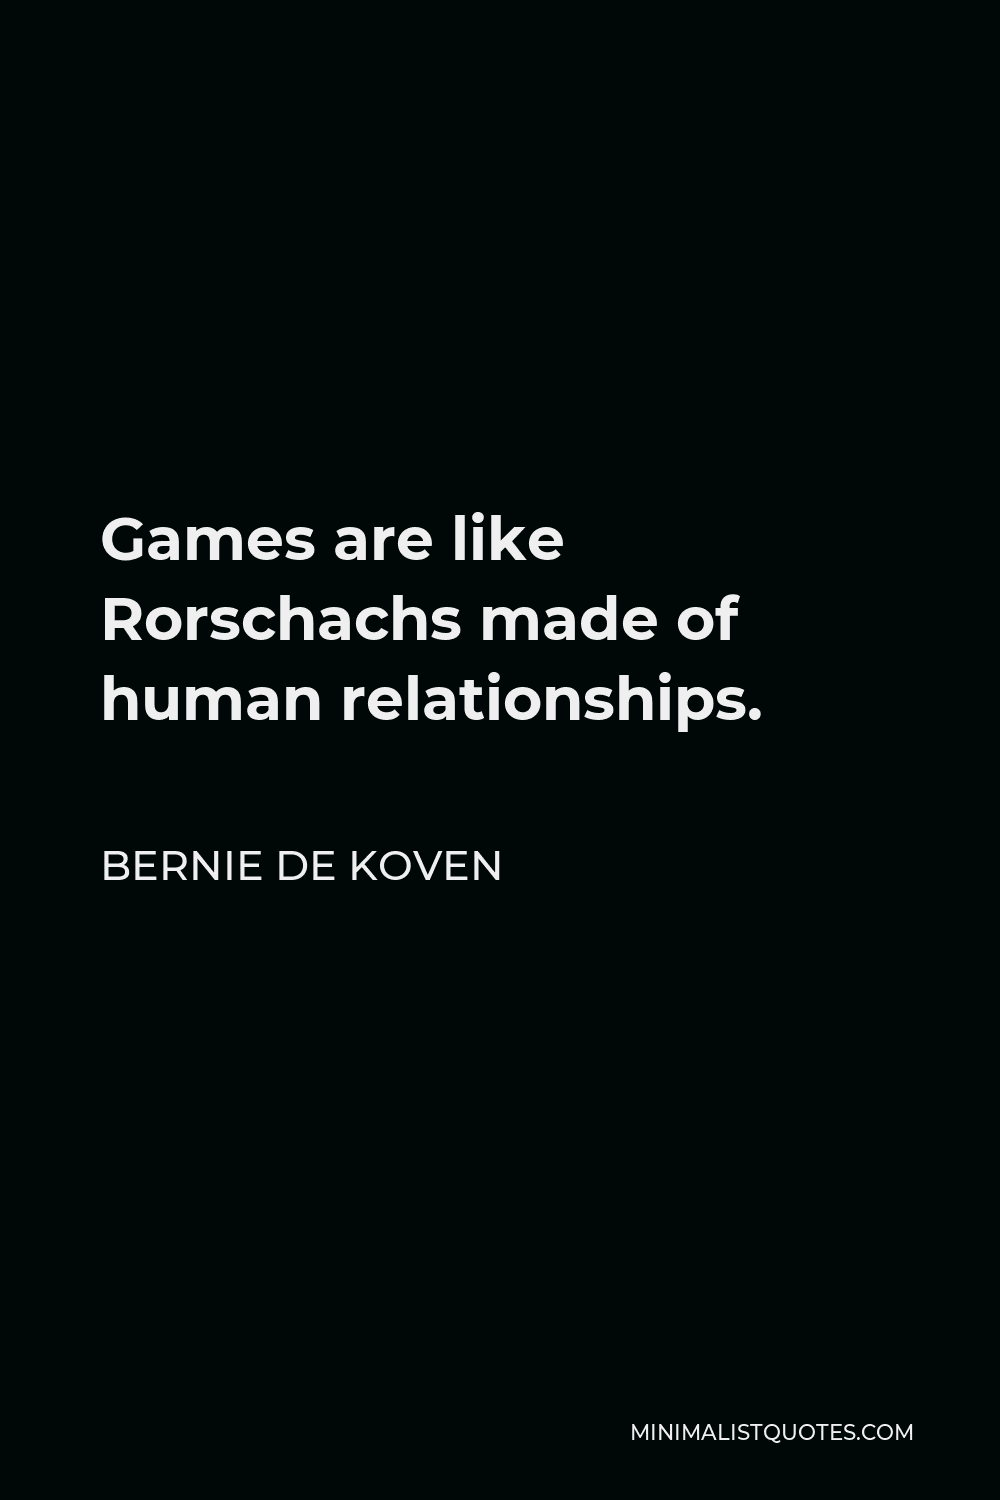 Bernie De Koven Quote - Games are like Rorschachs made of human relationships.